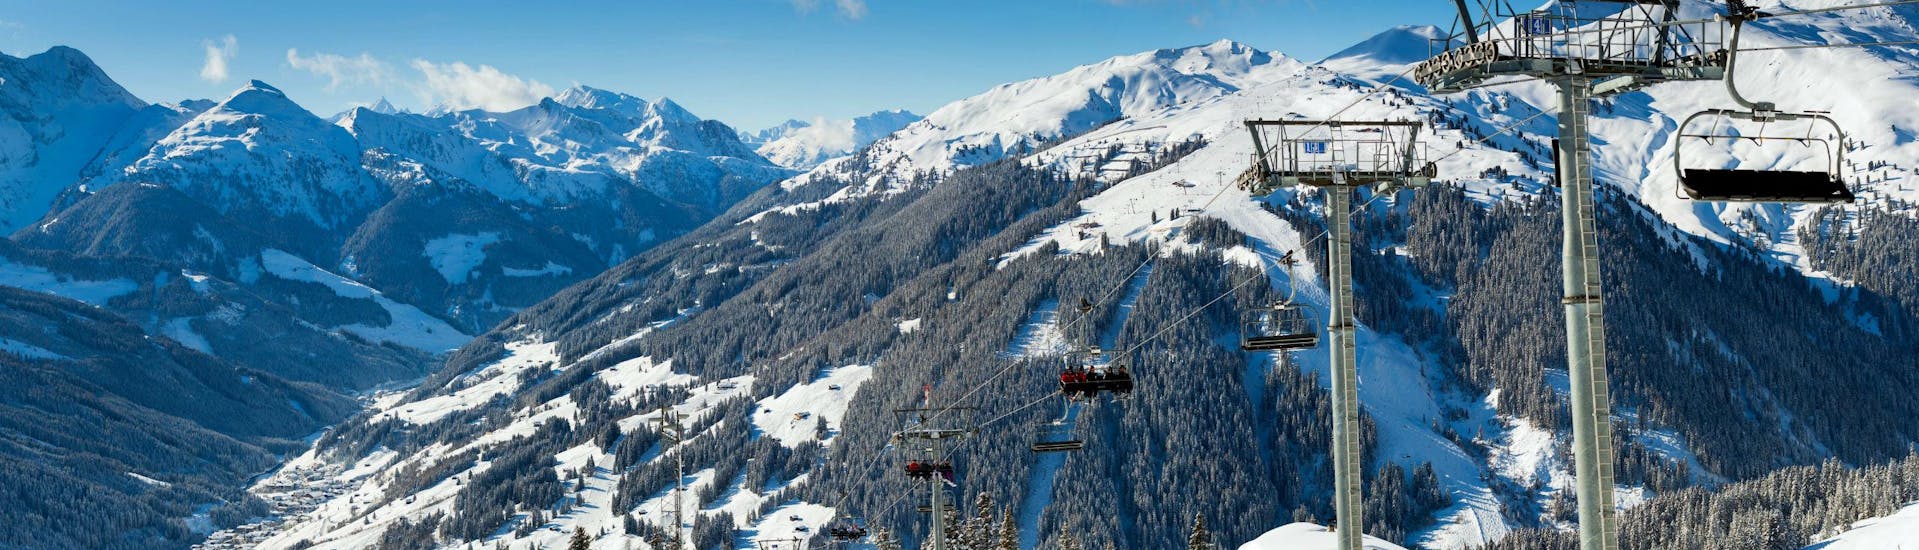 A panoramic view of the Zillertal Valley in which the local ski schools based in Zell am Ziller offer ski lessons for those who wish to learn to ski.